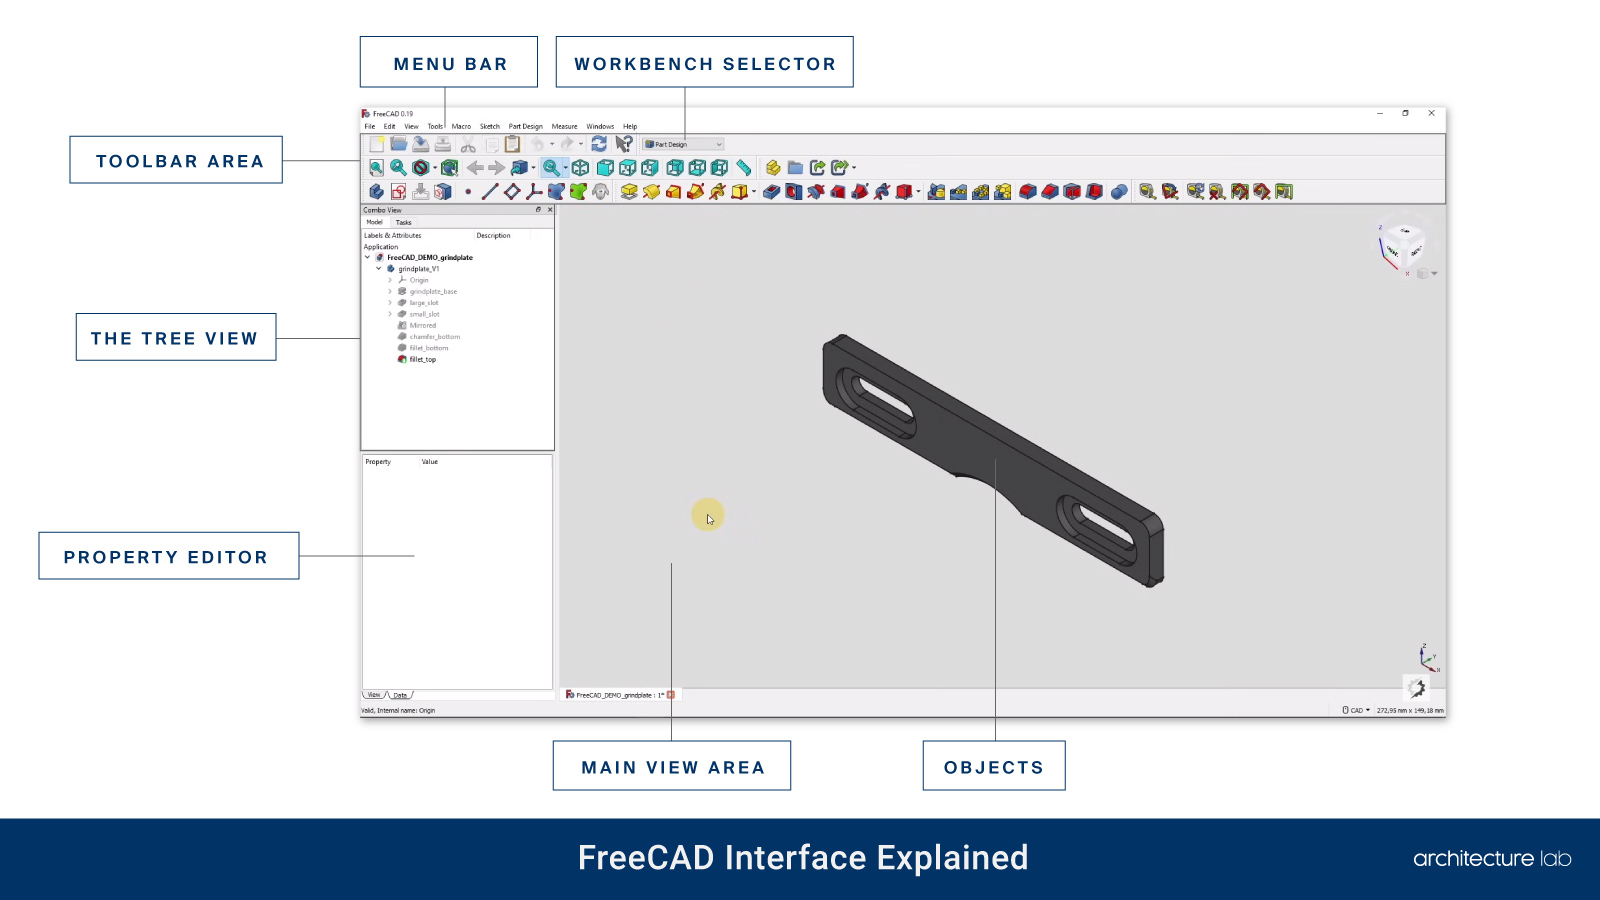 Freecad: should you buy it? The architect verdict!